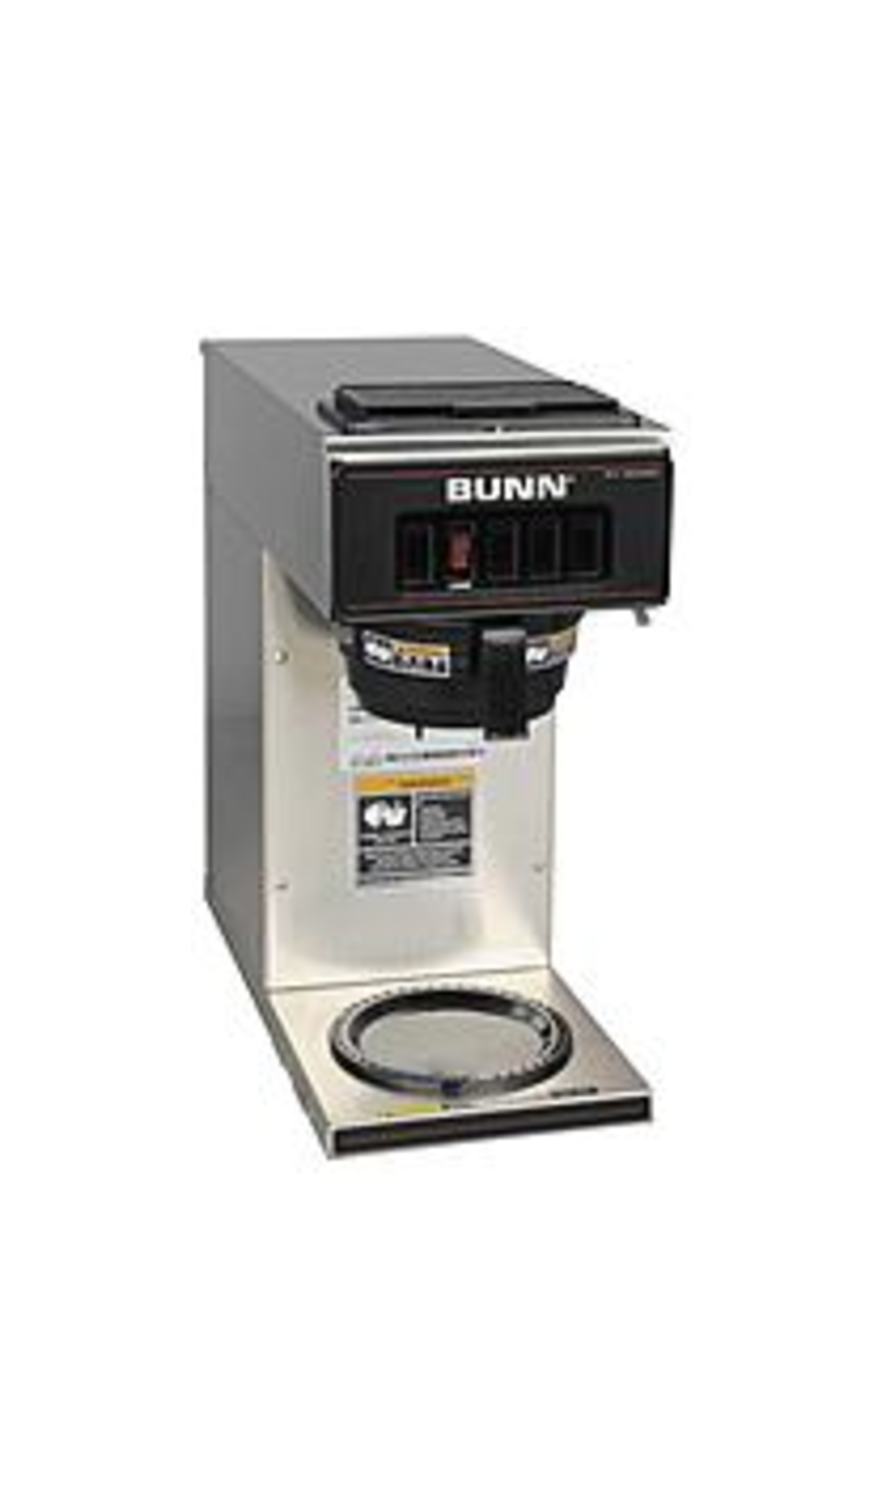 BUNN 13300.0001 VP17-1 12-Cup Low Profile Commercial Pourover Coffee Brewer - Stainless Steel - Silver